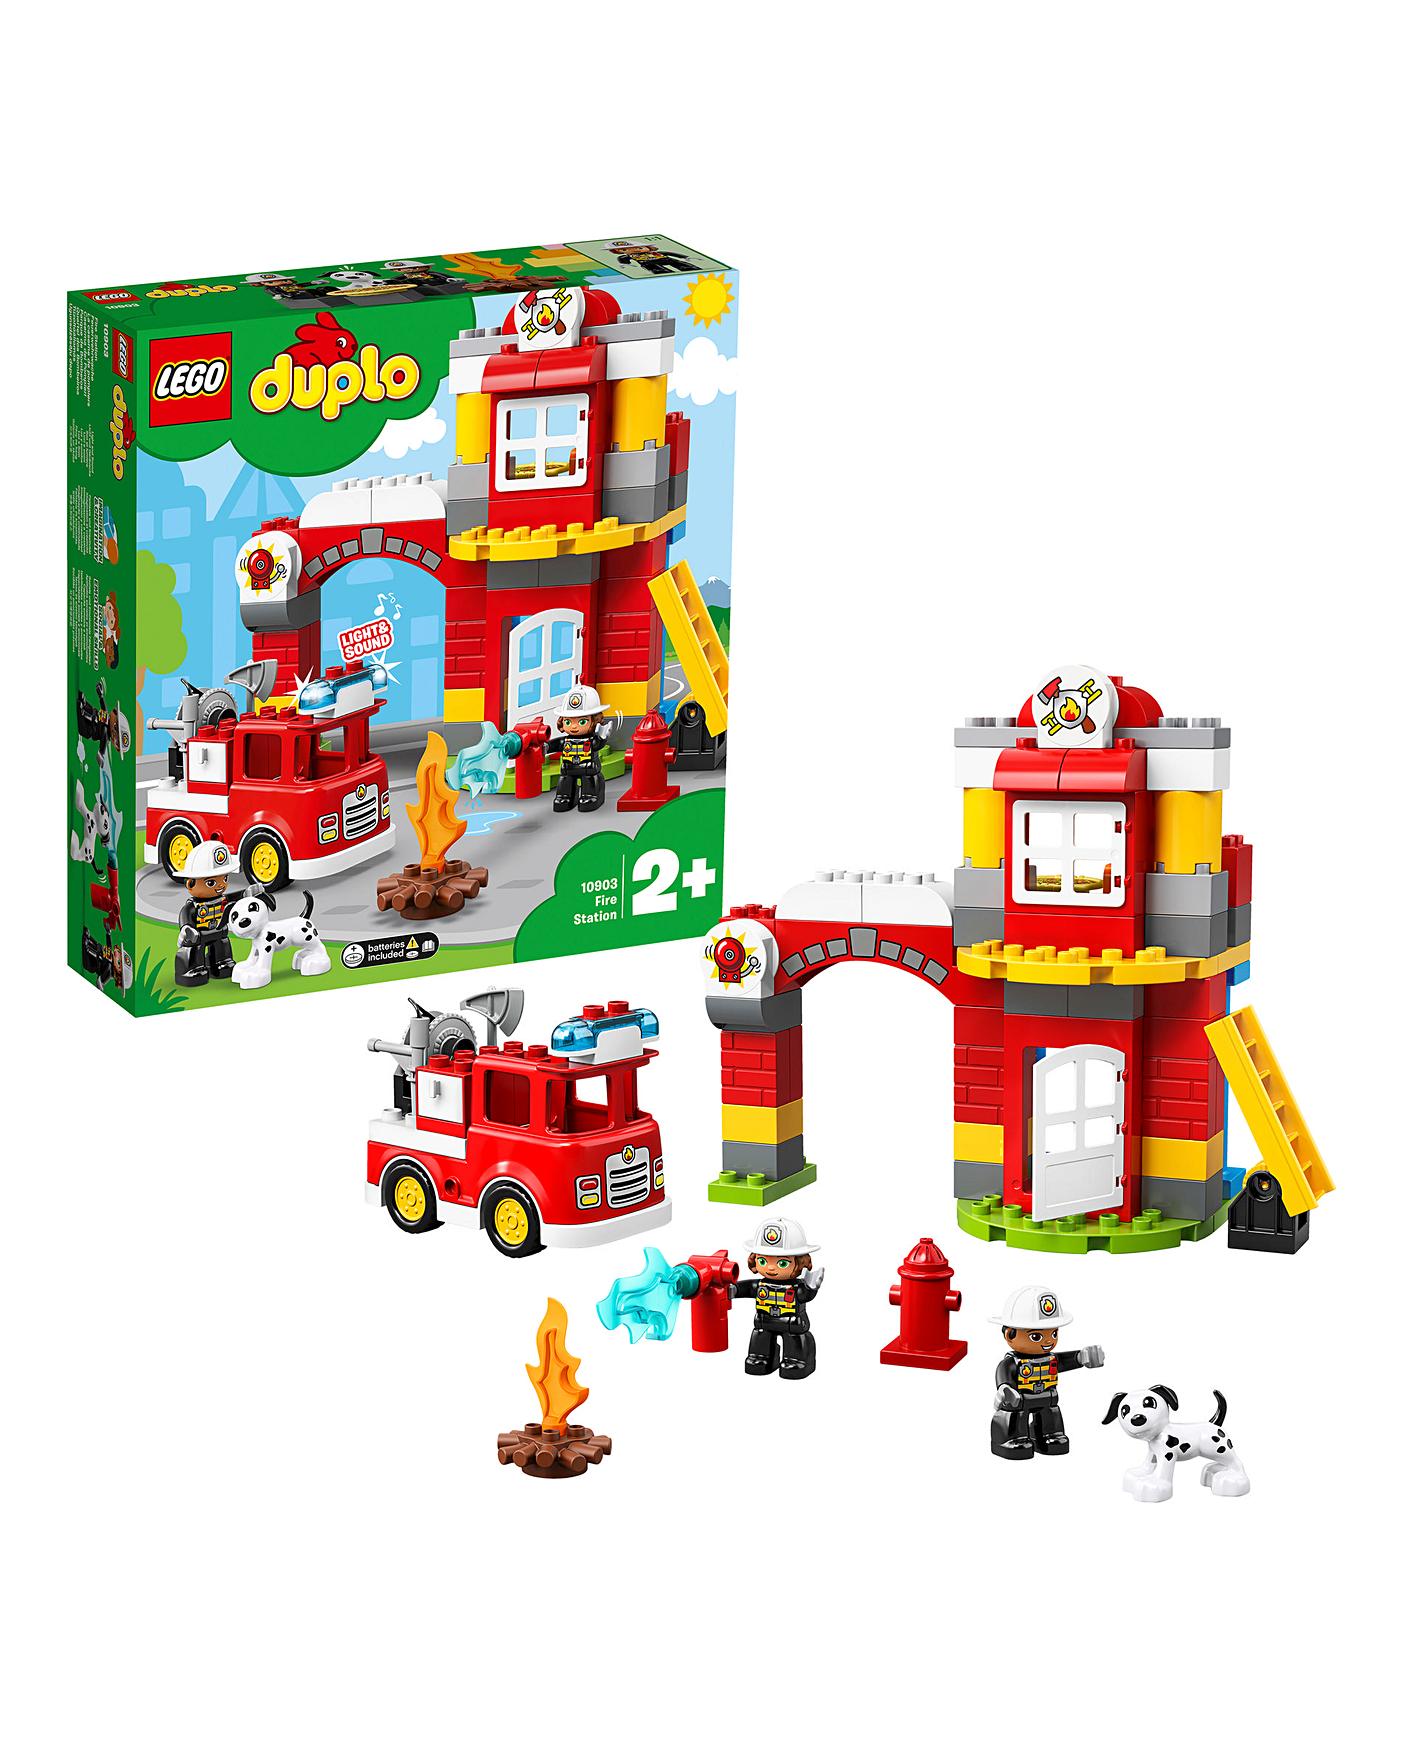 toddler fire station playset